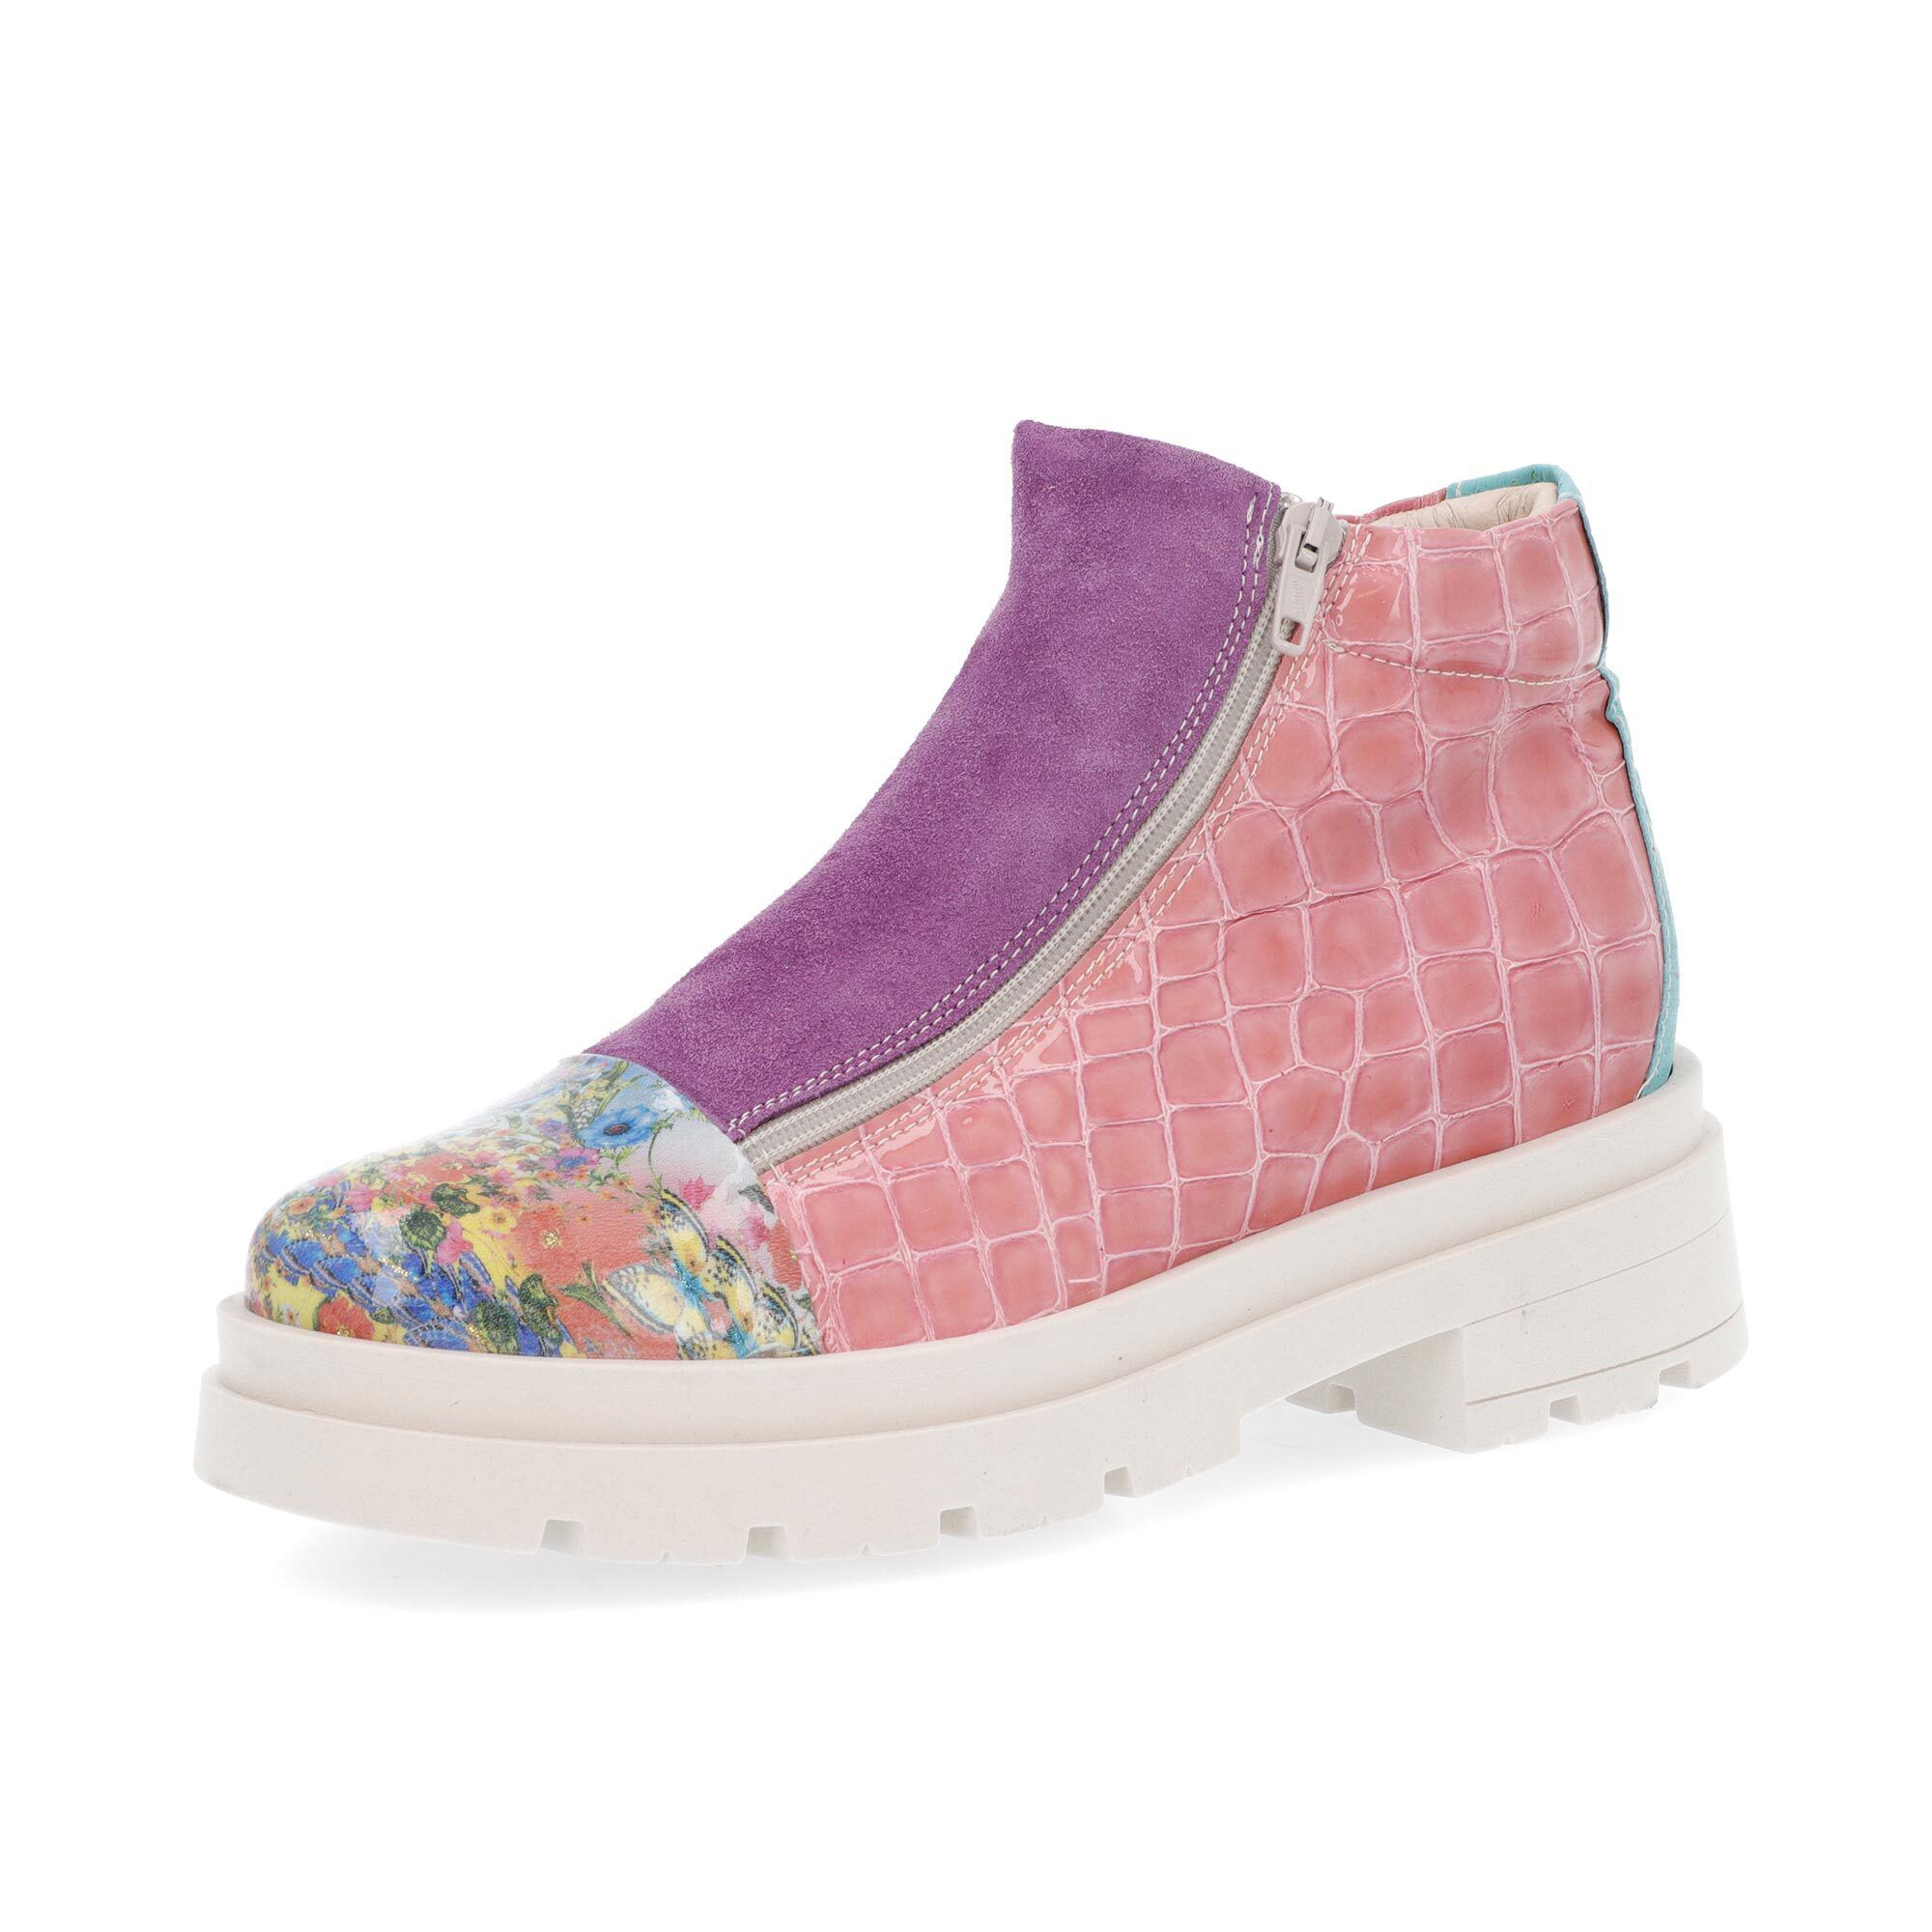 Image of Sneakers alte in pelle patchwork con tacco 5 cm